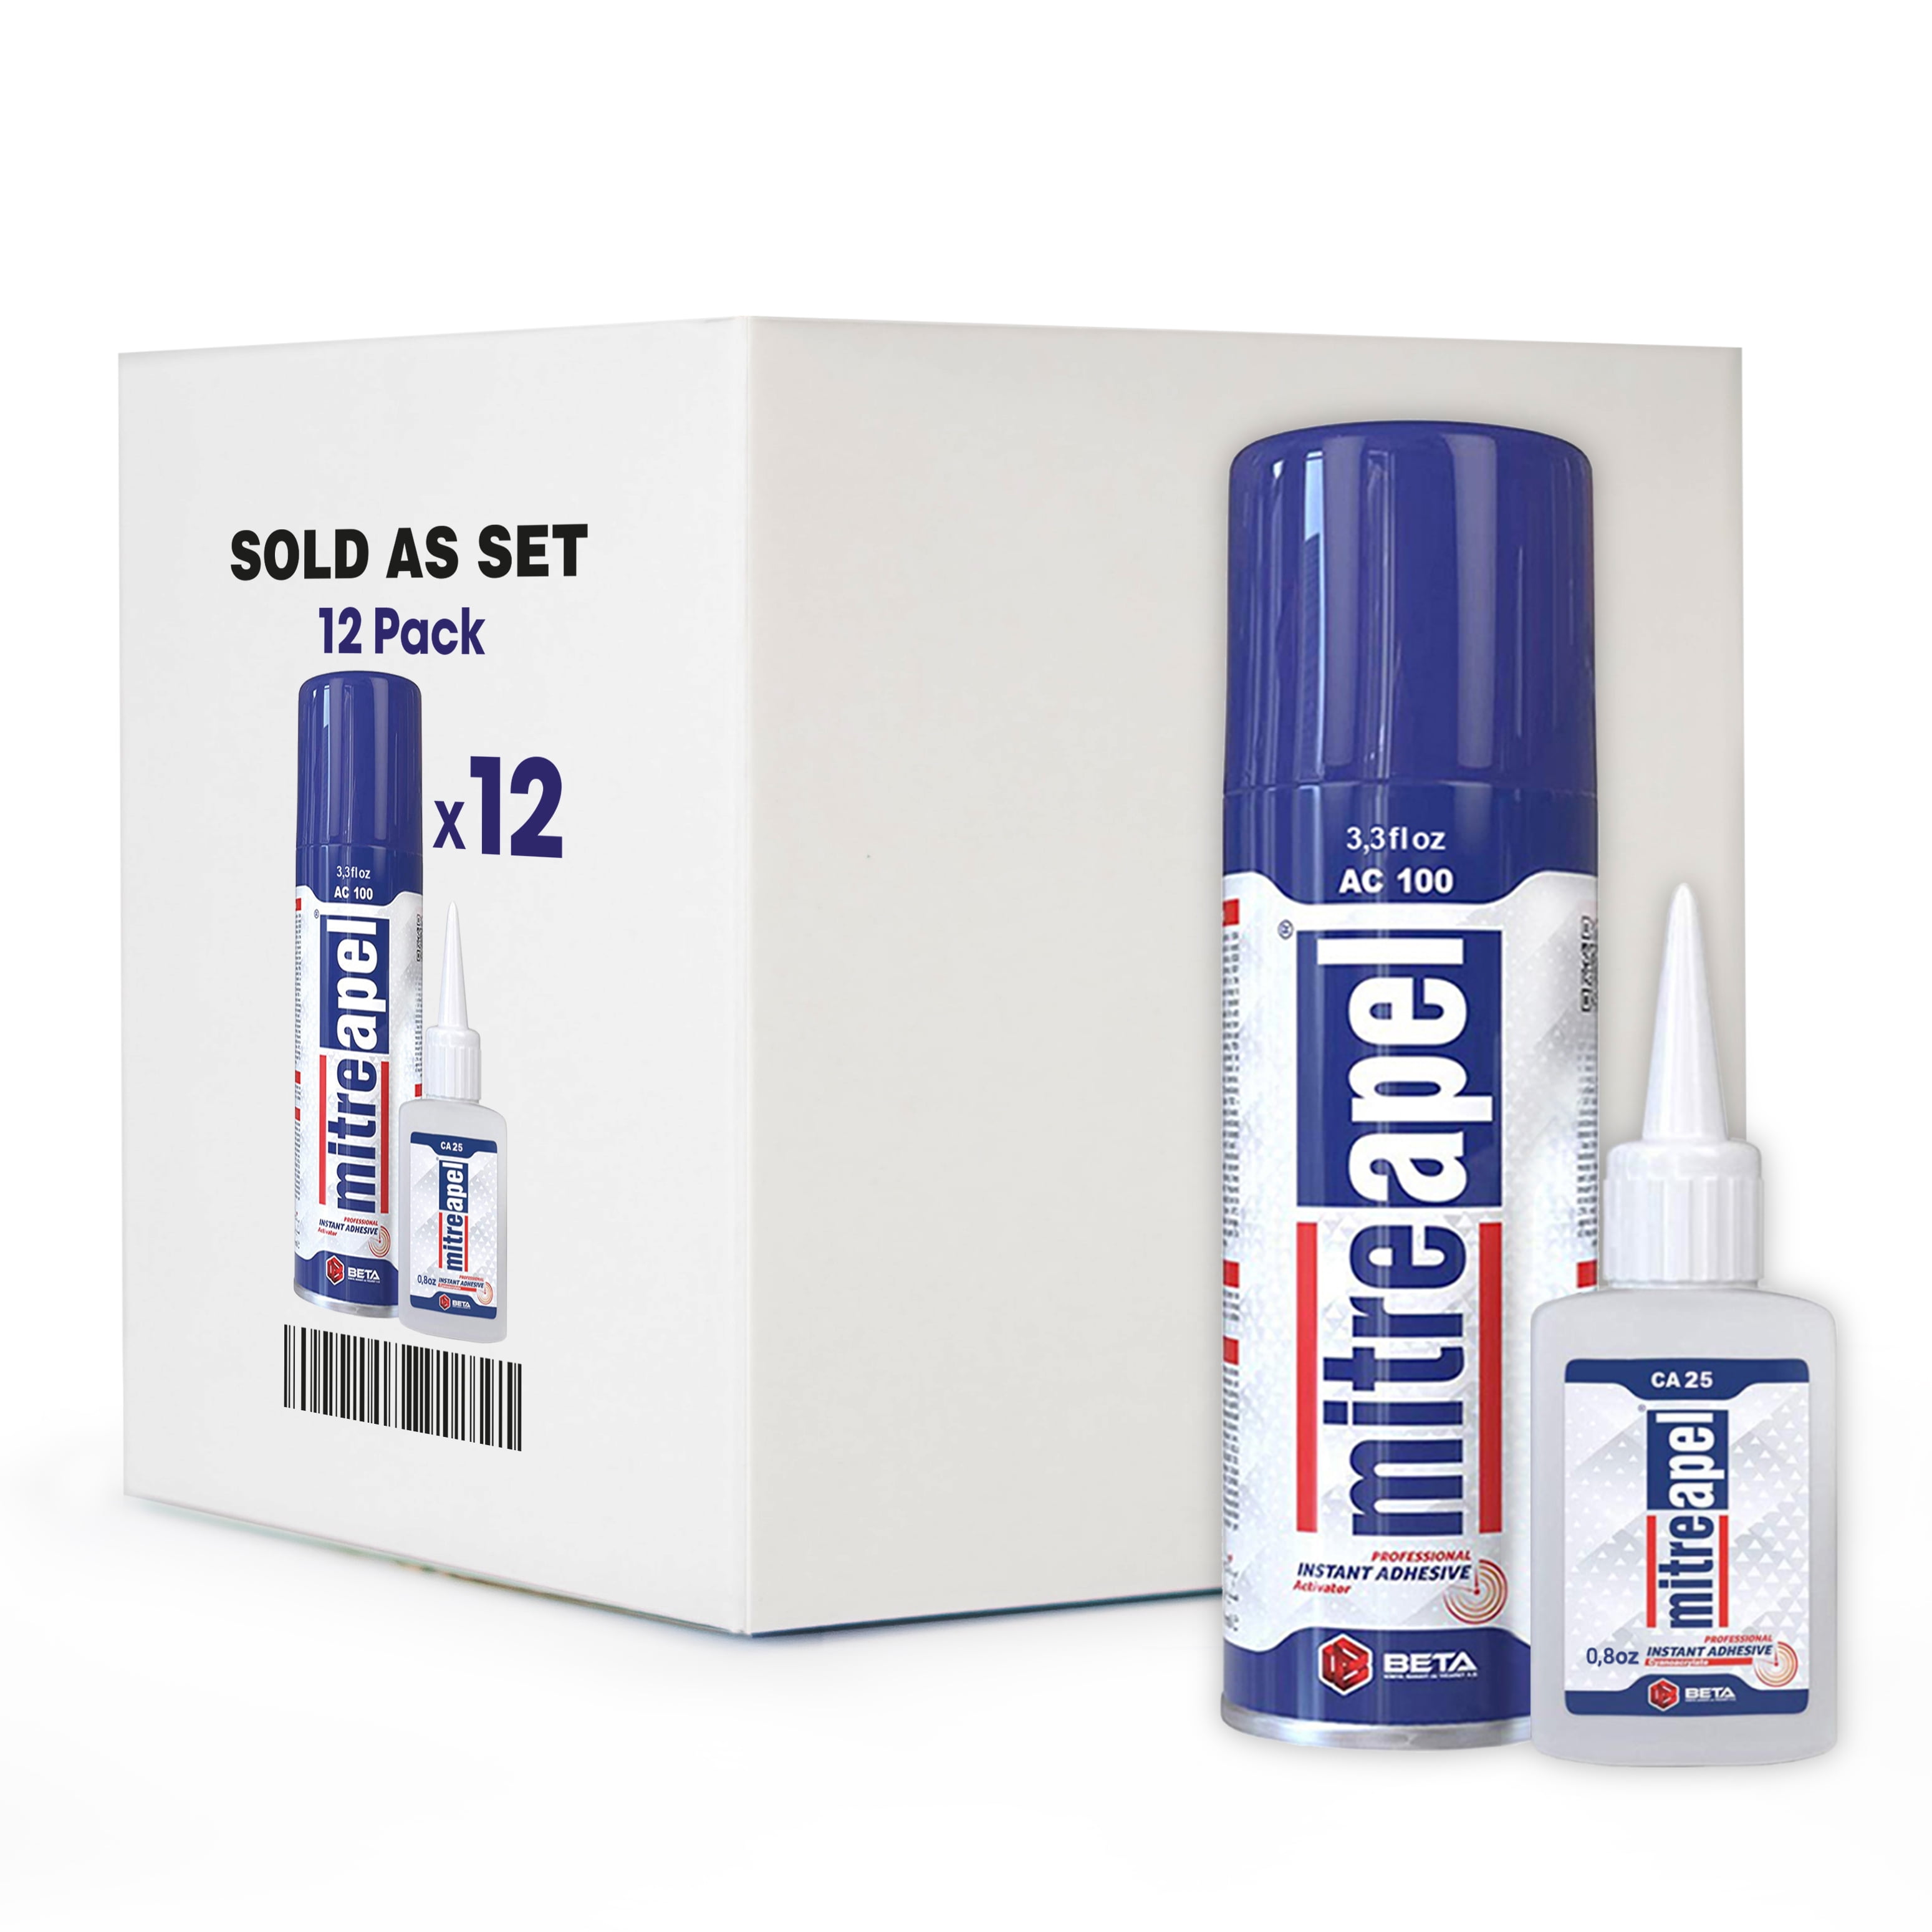 Mitreapel fast adhesive - Buy Mitreapel fast adhesive product on